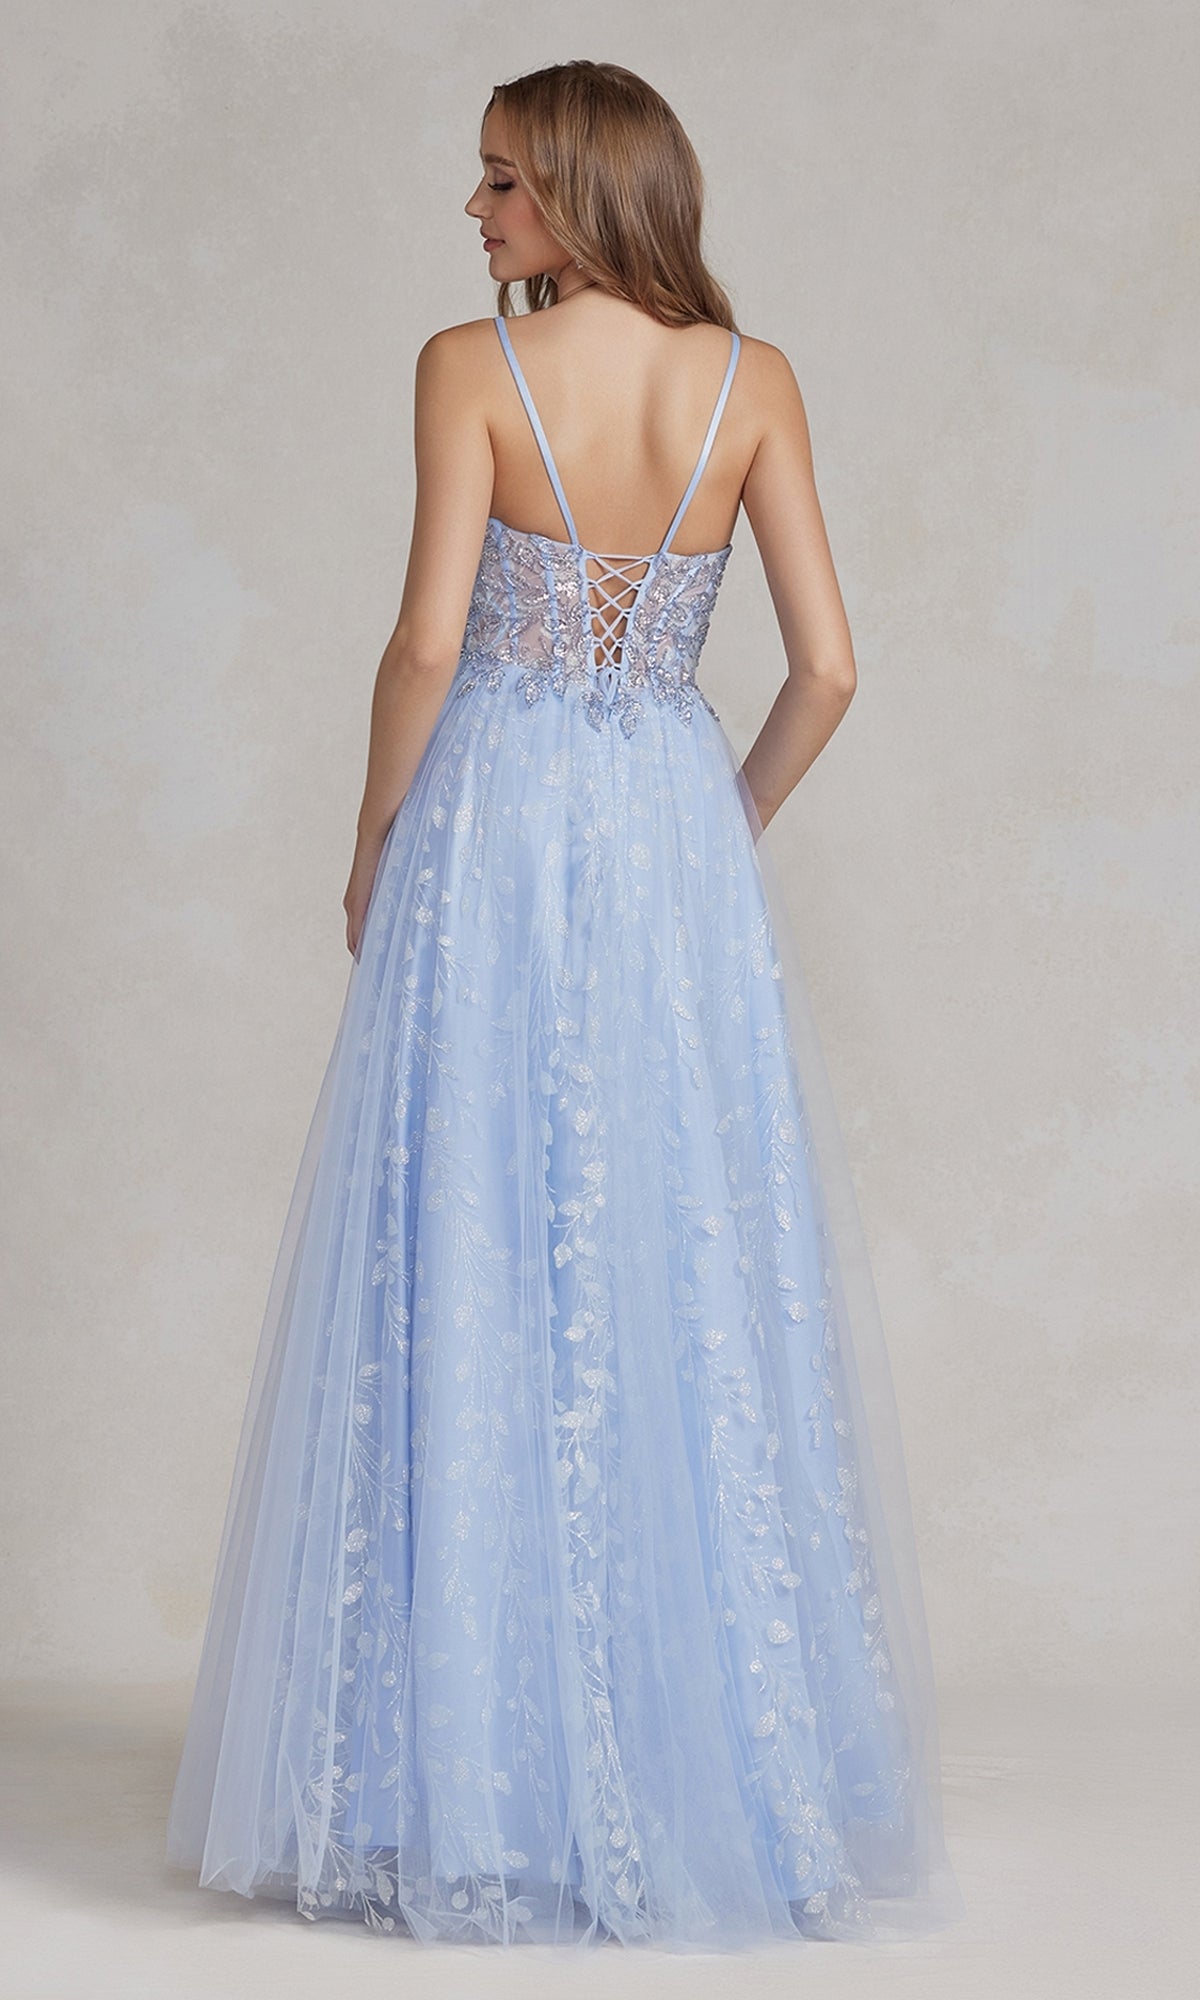  Periwinkle Sheer-Bodice Long A-Line Prom Dress